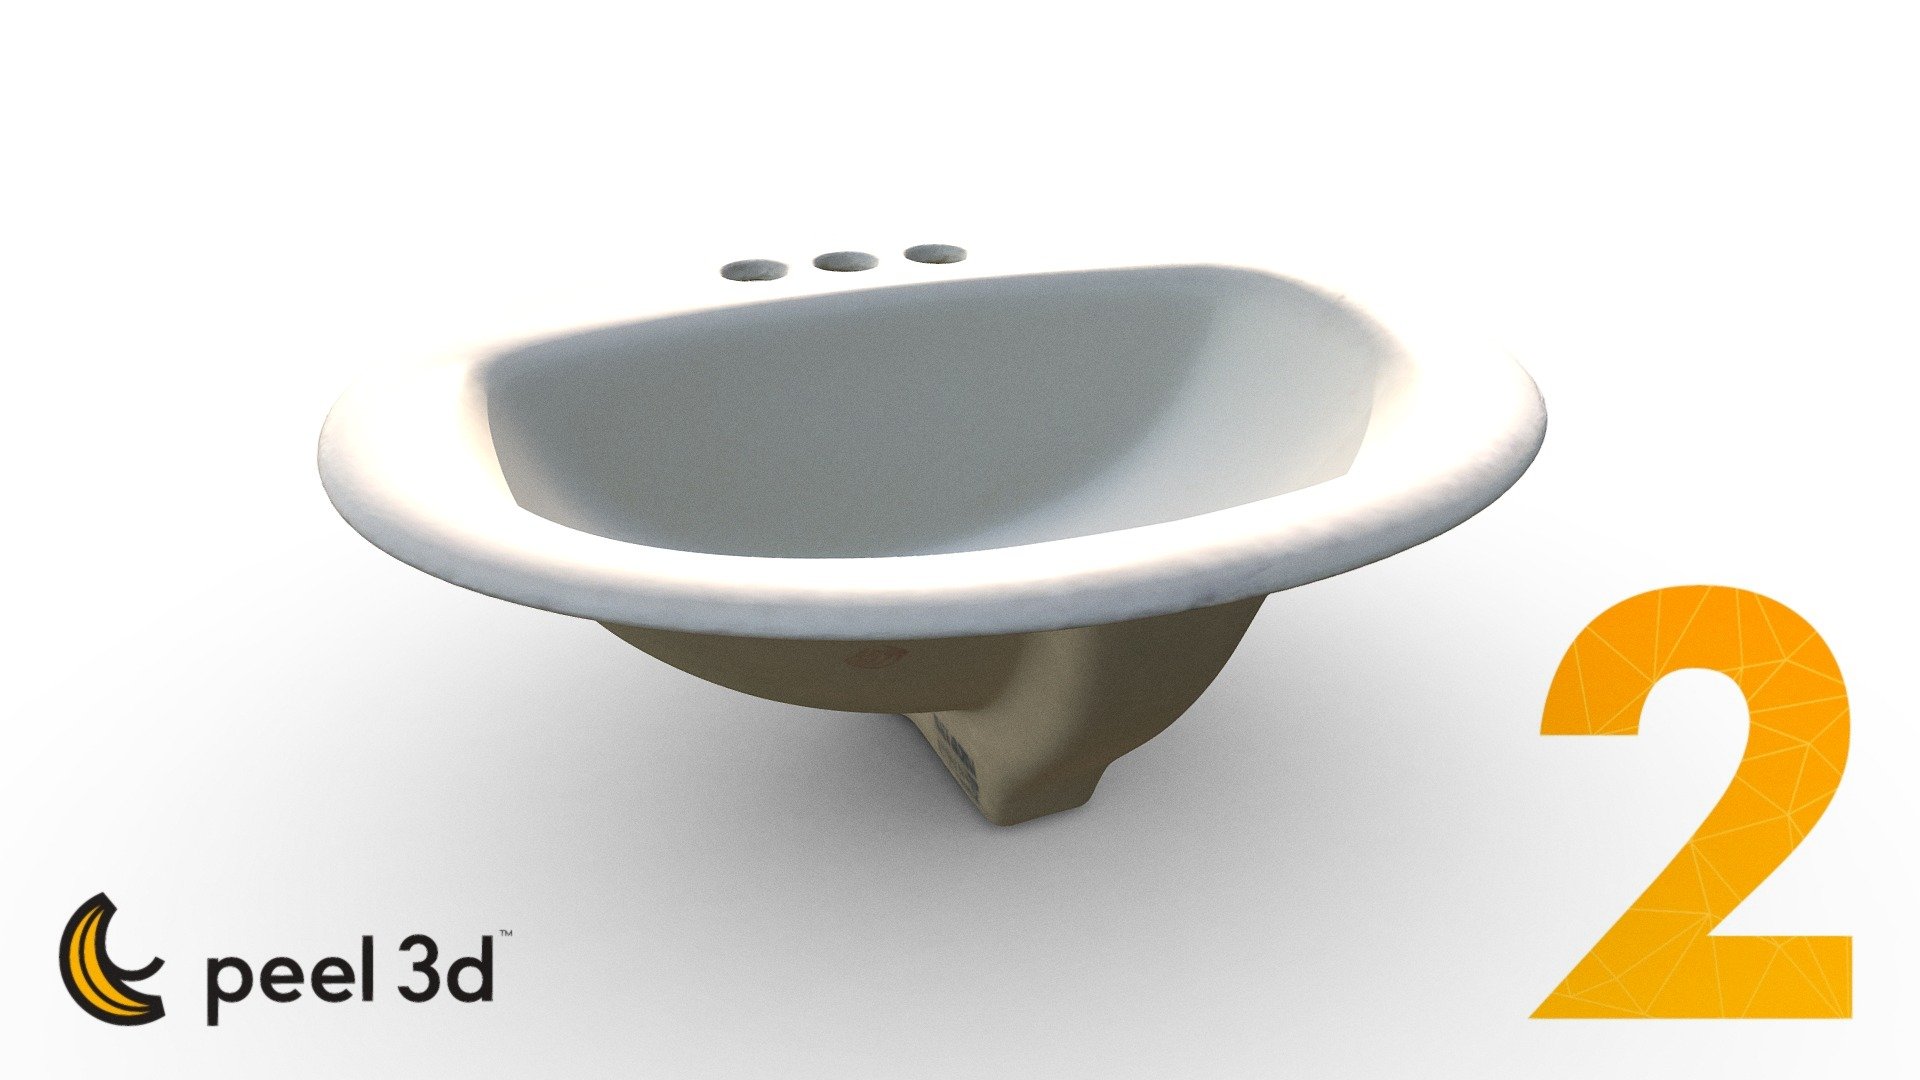 This is a shiny porcelain sink scanned with peel 2 directly. The scan came out great, without any special treatment or spraypowder.

For more information on peel 2, visit our website: peel-3d.com - Porcelain Sink scanned with peel 2 - 3D model by peel-3d.com 3d model